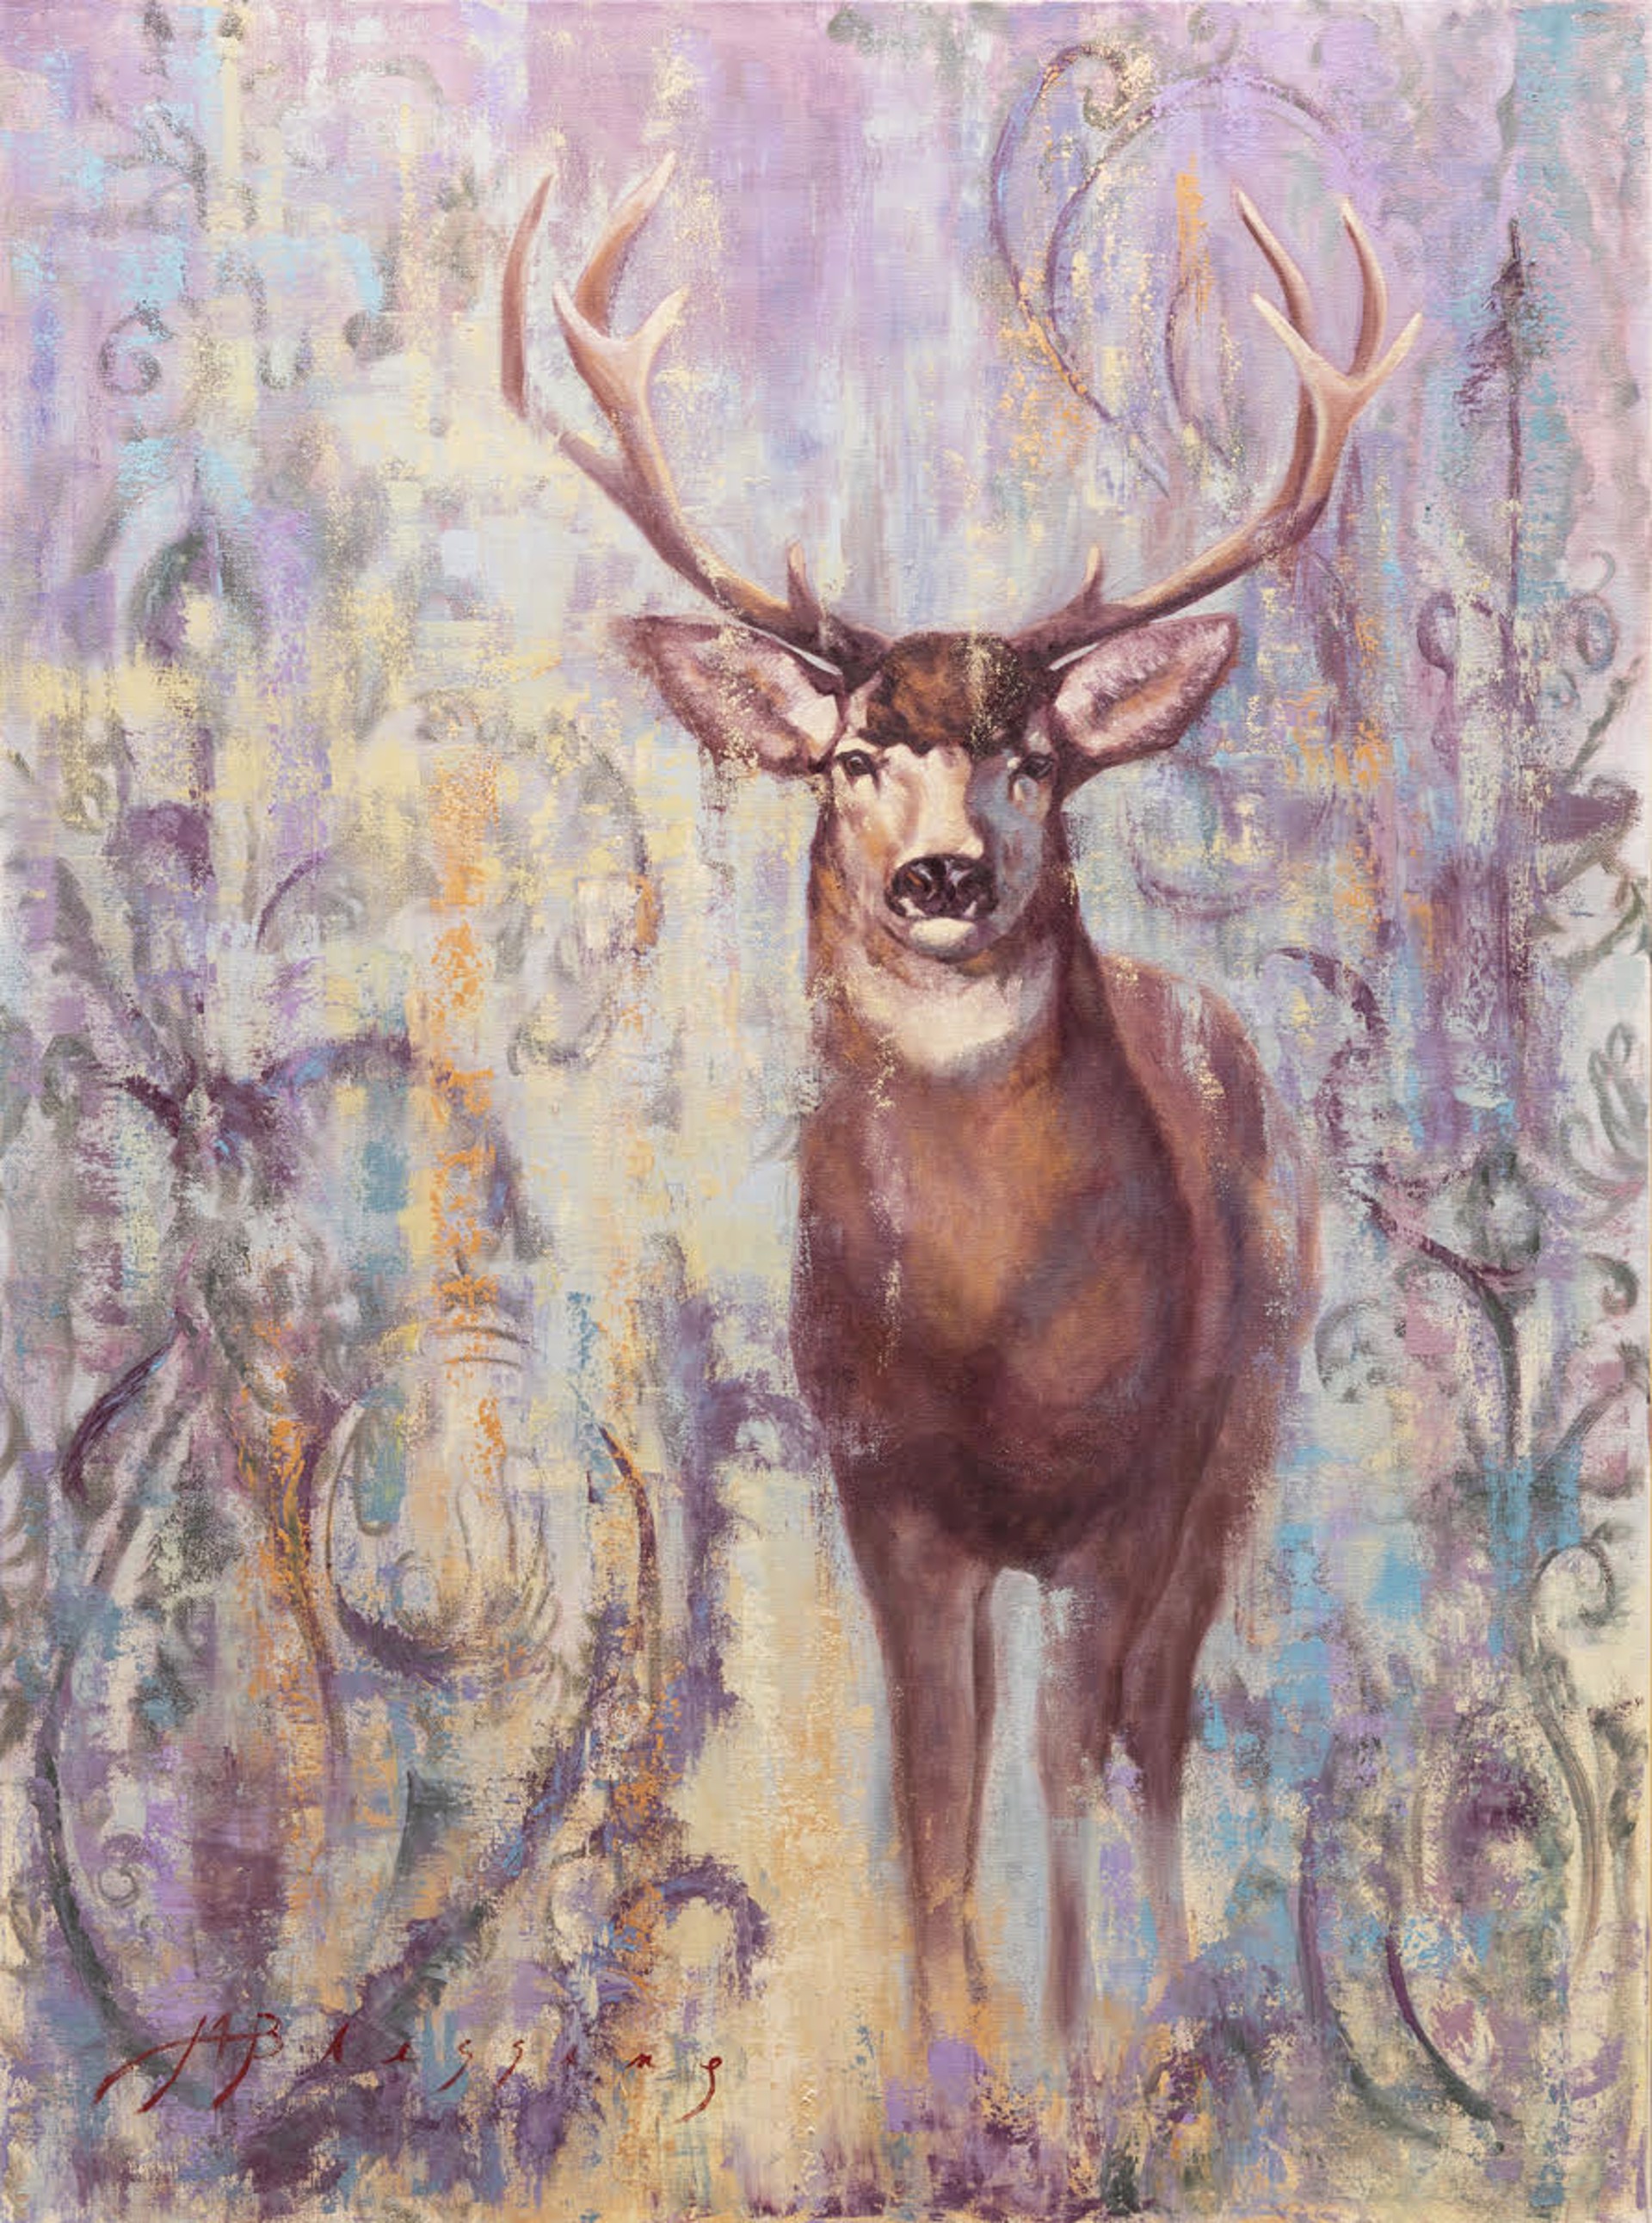 A Contemporary Oil Painting Of A Buck Mule Deer Walking Towards The Viewer Out Of An Abstract Modern Rustic Colorful Background, By Meagan Blessing